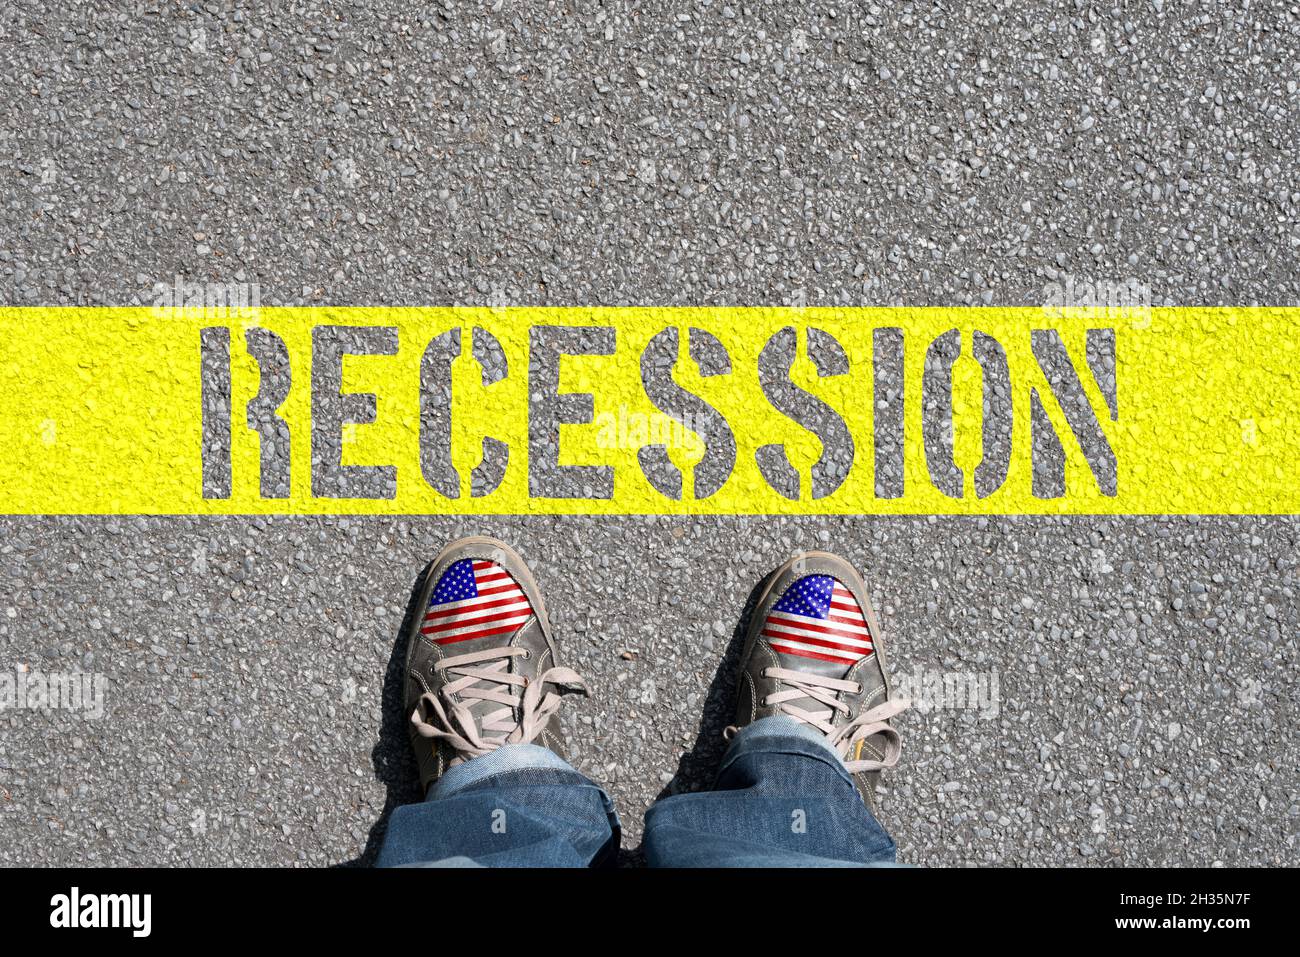 Recession in United States Stock Photo